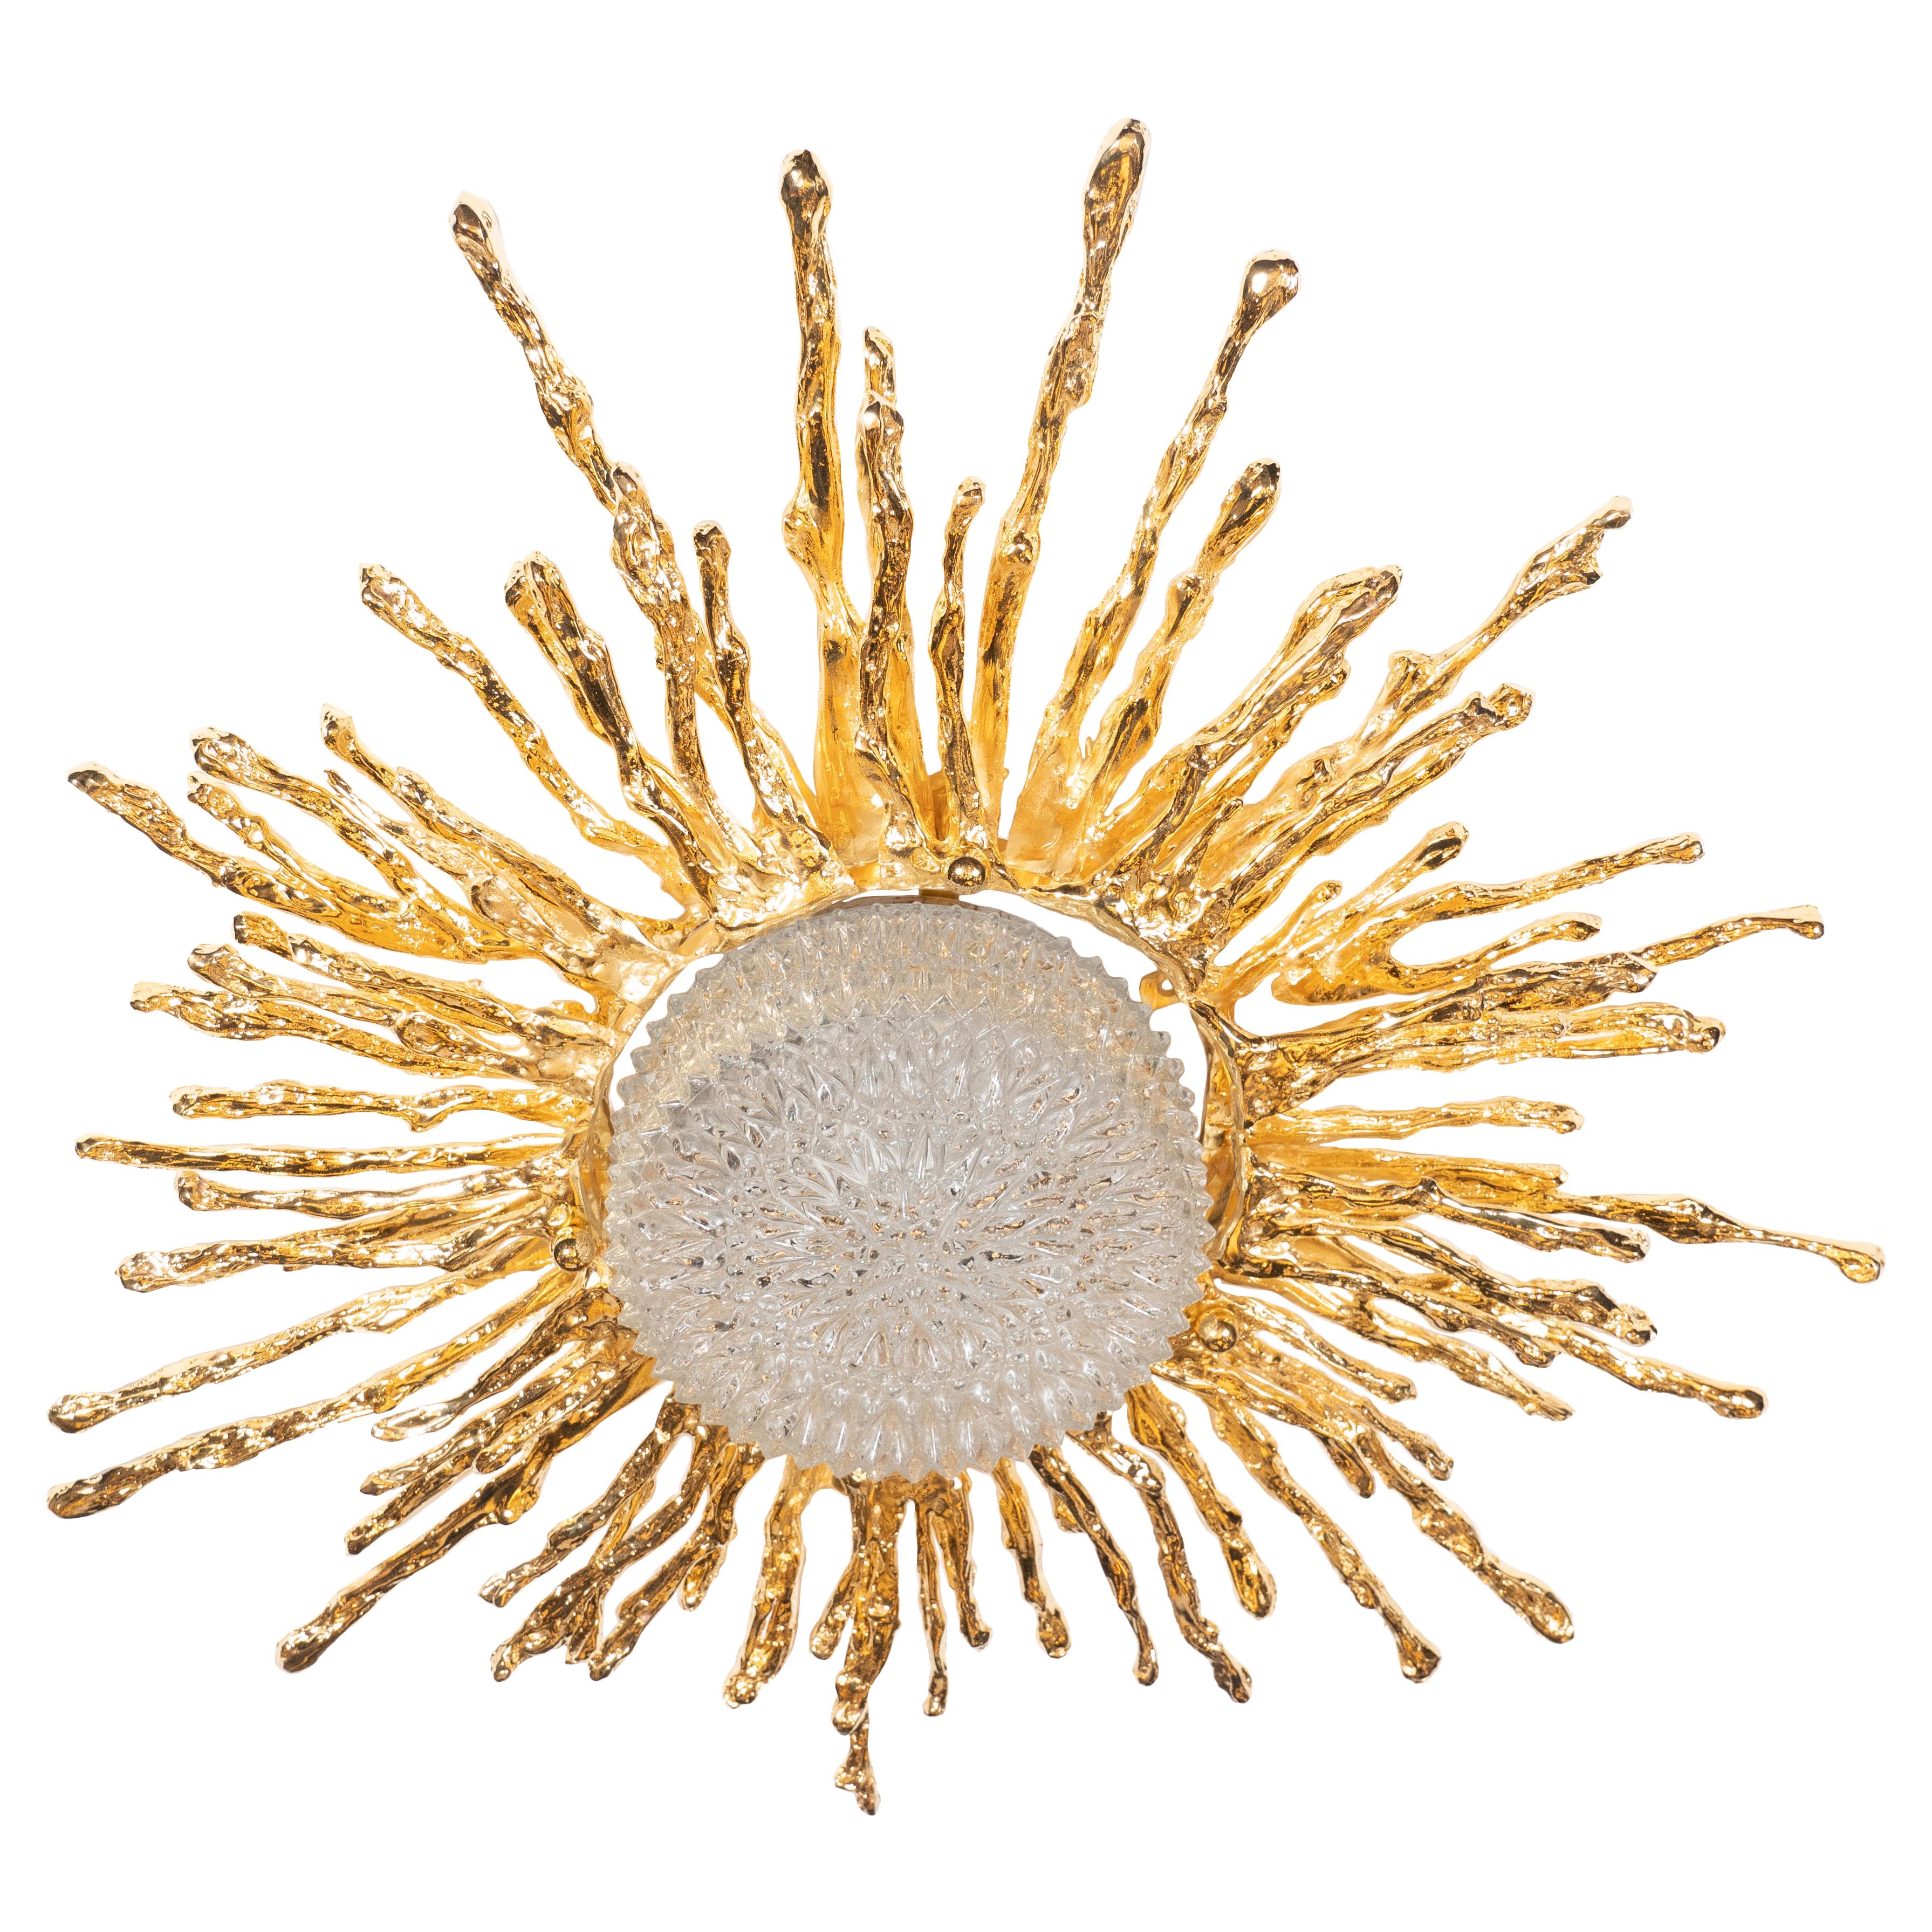 This stunning and dramatic flush mount chandelier was hand crafted by the esteemed artist Claude Boeltz in France. It features an expressionistic sunburst pattern realized in exploded bronze plated in pure 24-karat yellow gold, the tendrils